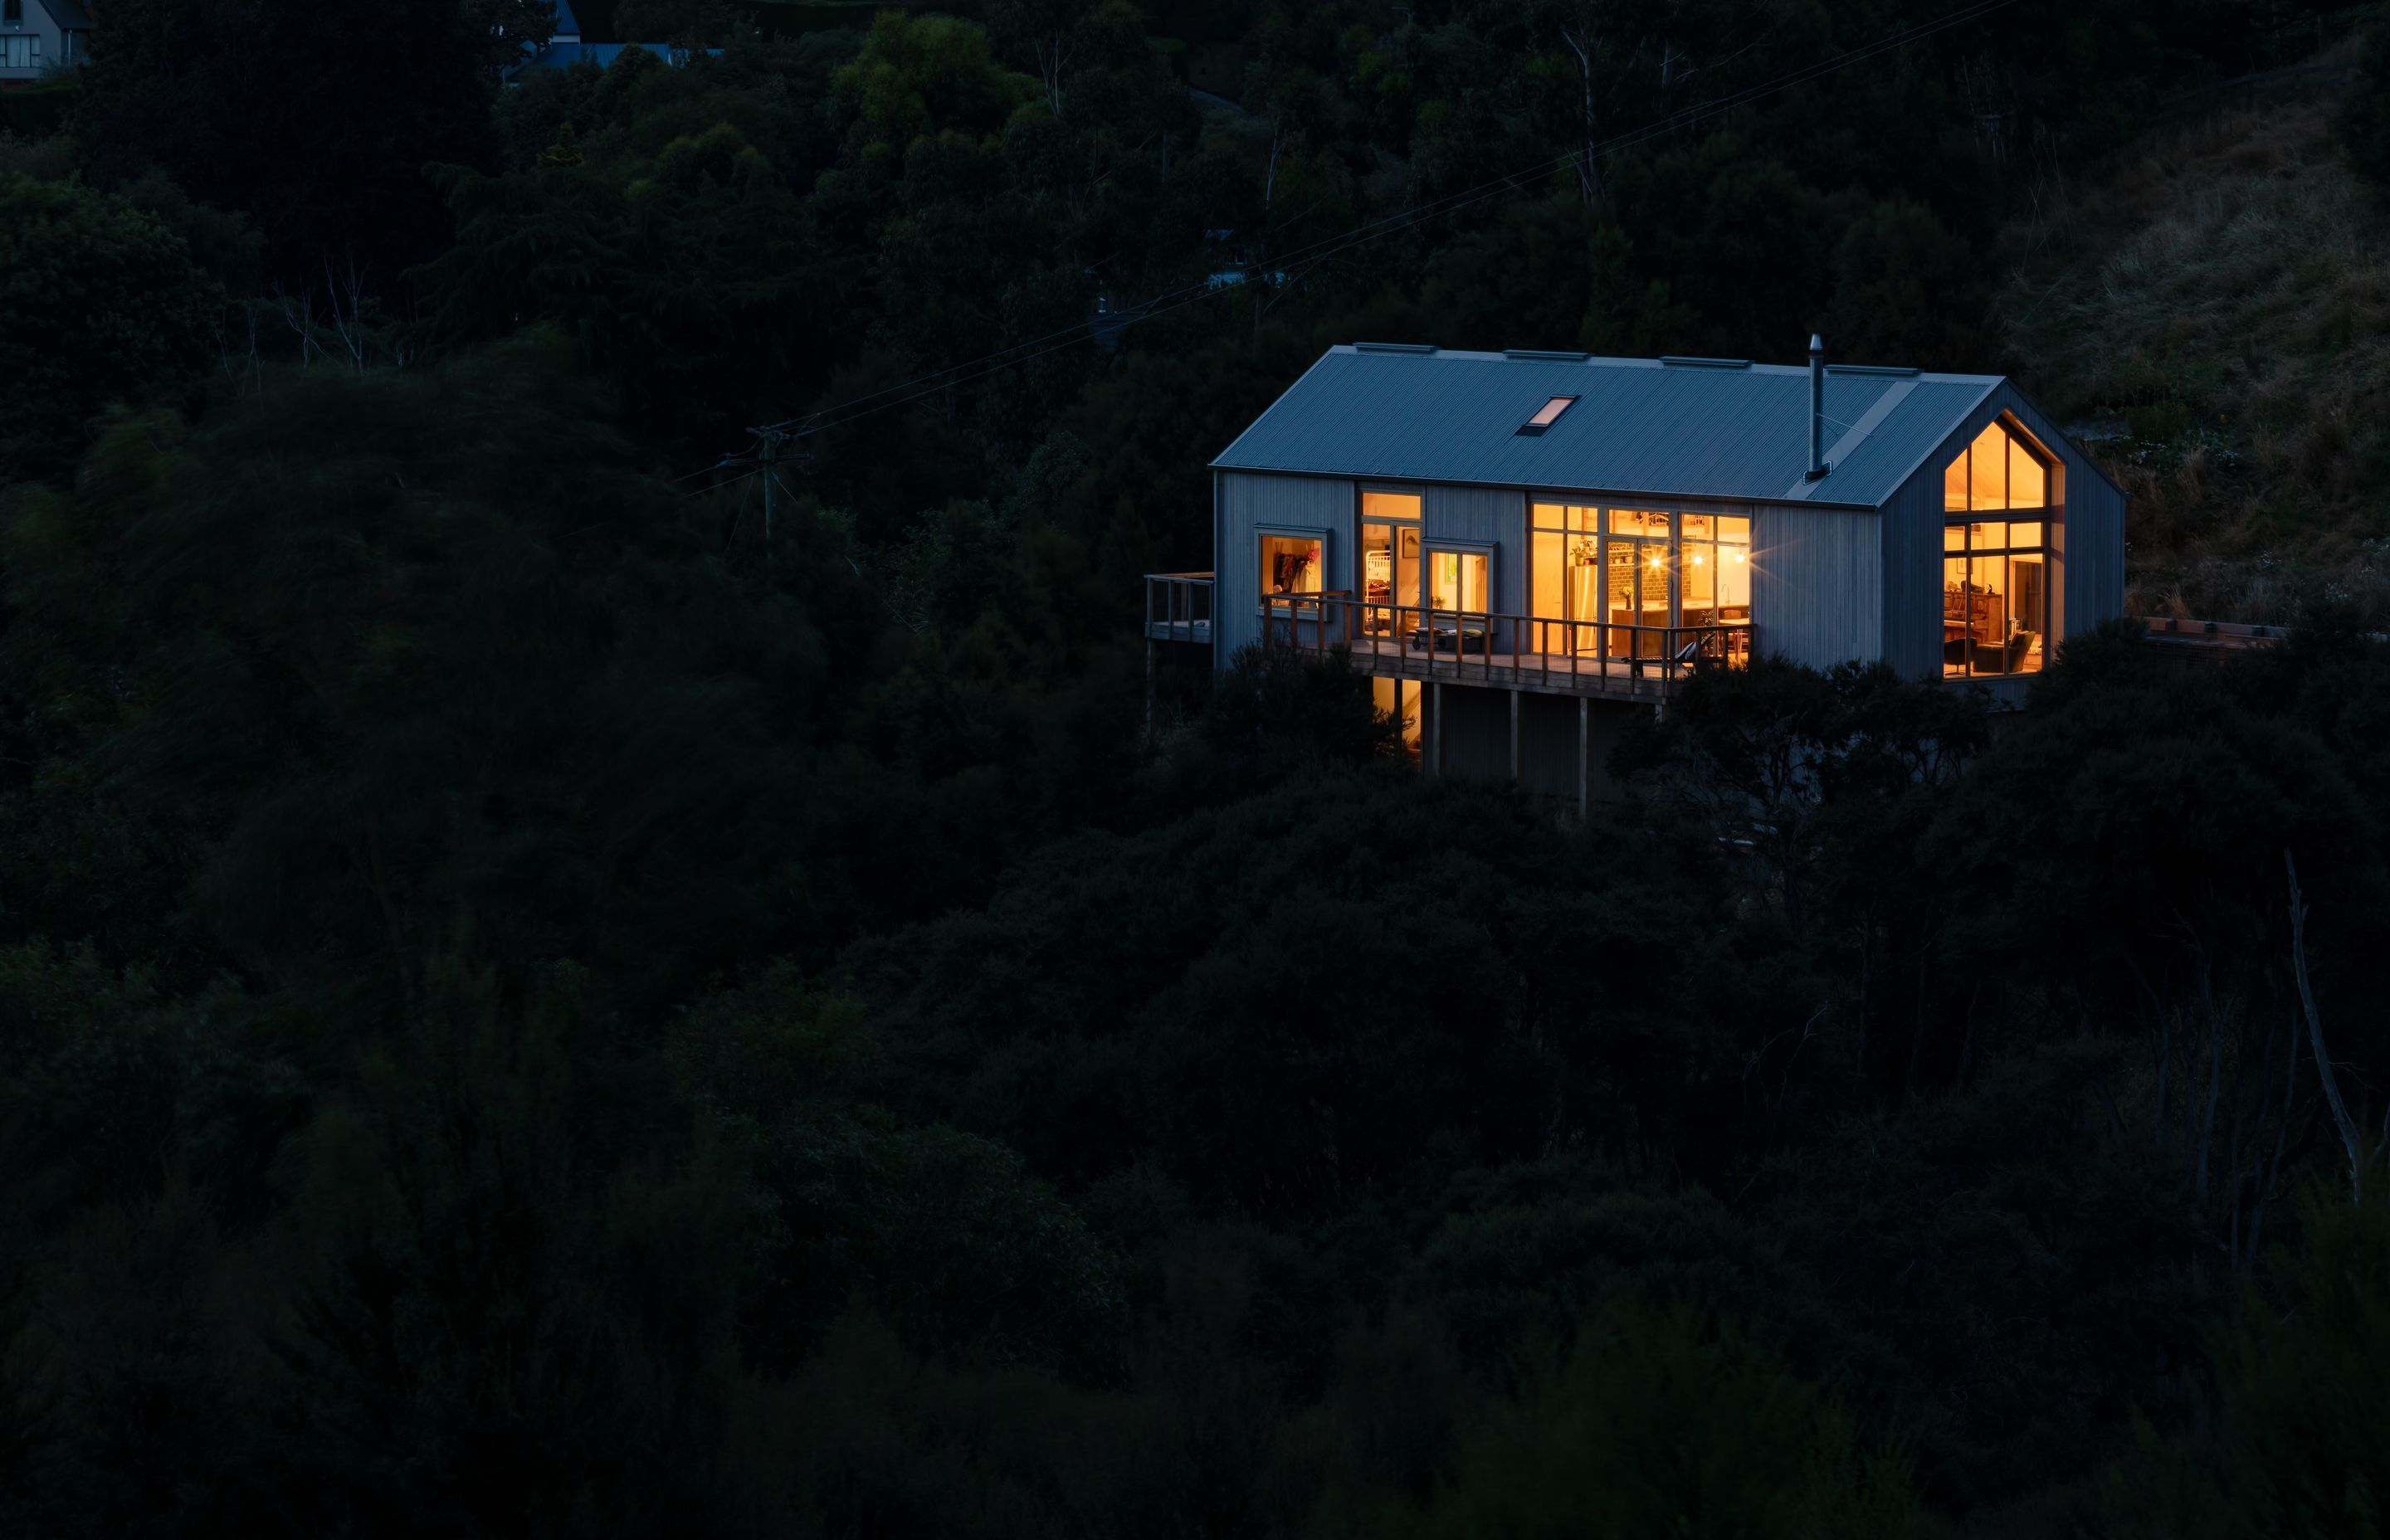 Nestled into the hillside, the form and layout of the house works with the slope and contour of the hill.